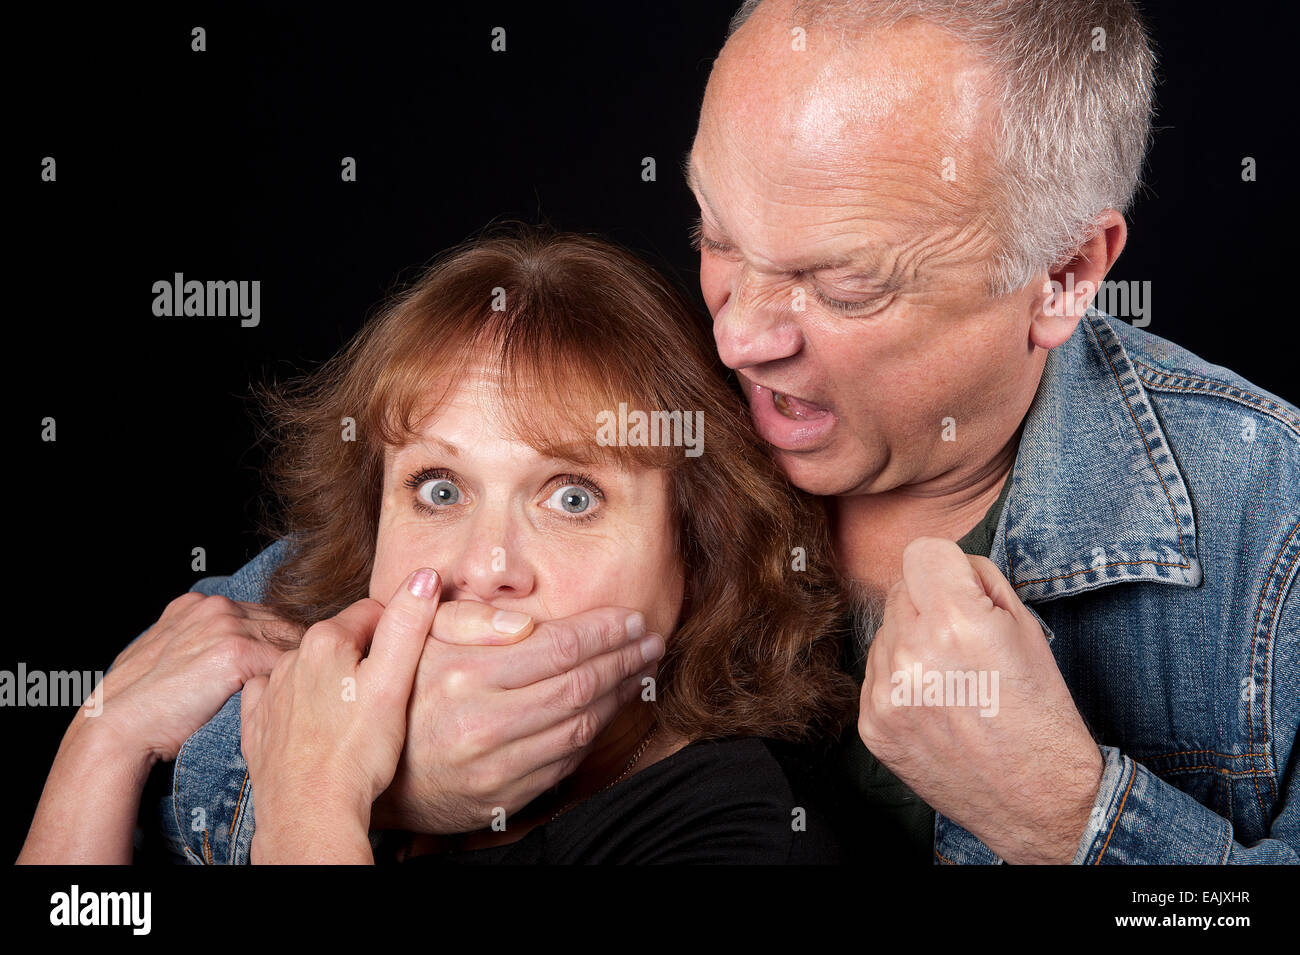 Man grabbing a woman from behind and threatening her with his fist. Stock Photo